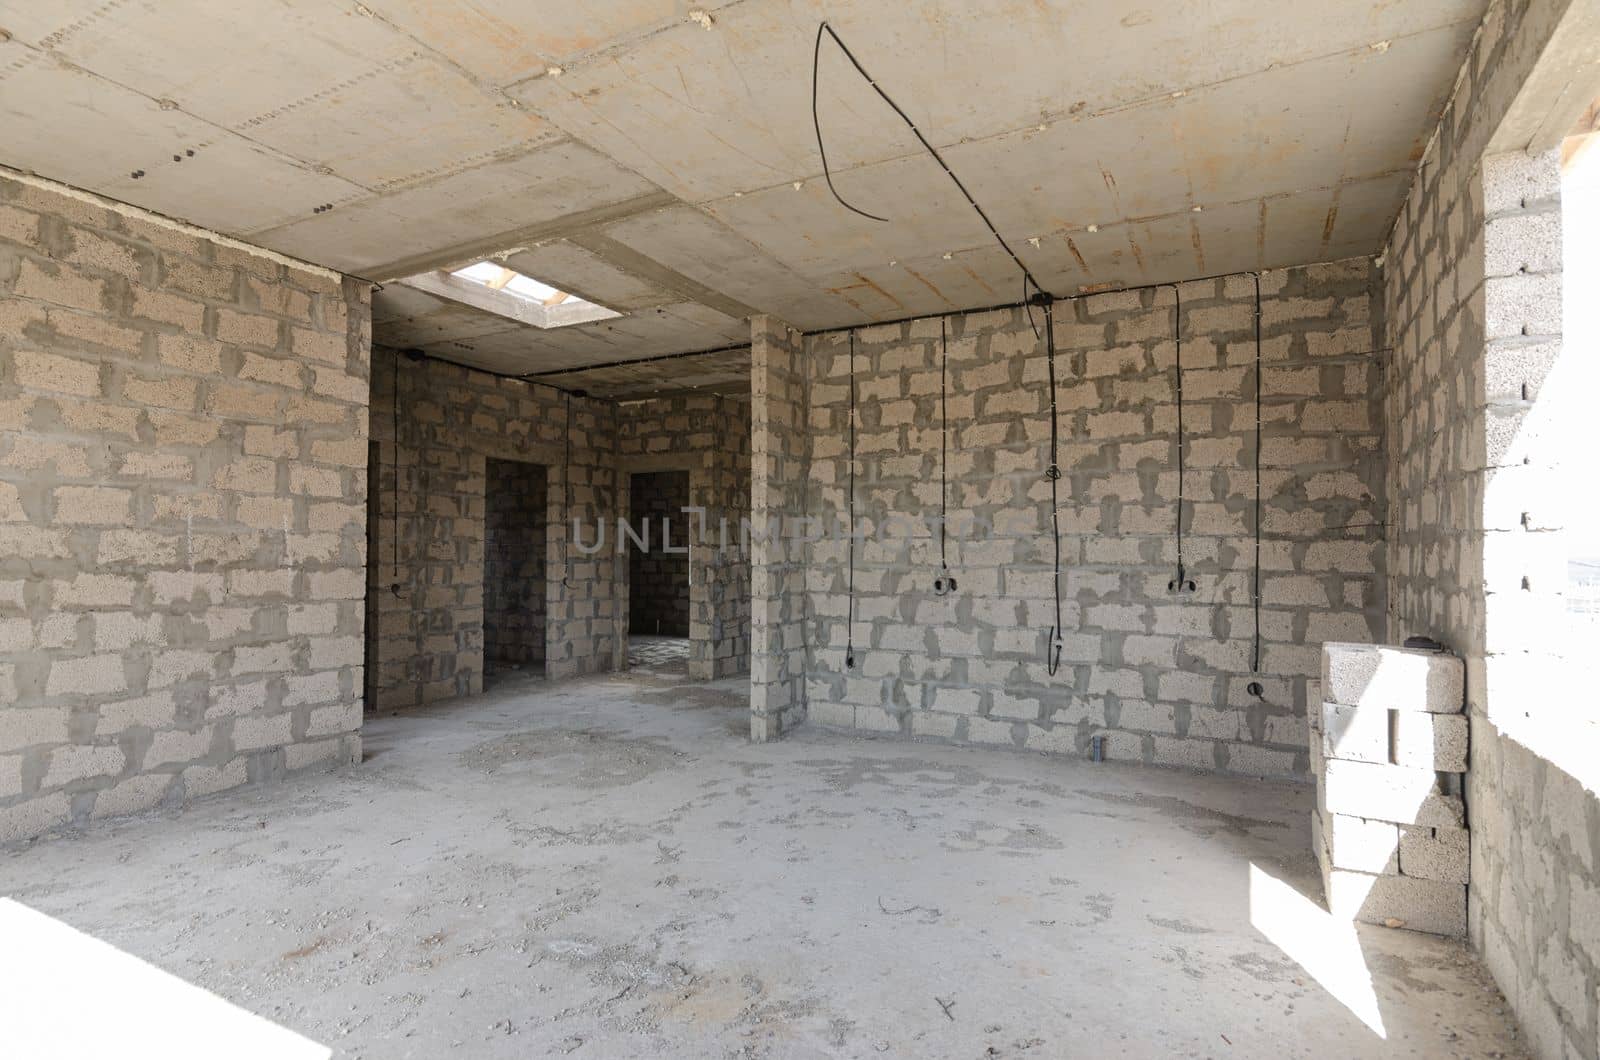 Construction of an individual residential building, walls made of expanded clay concrete block, monolithic concrete floor and reinforced concrete floors a